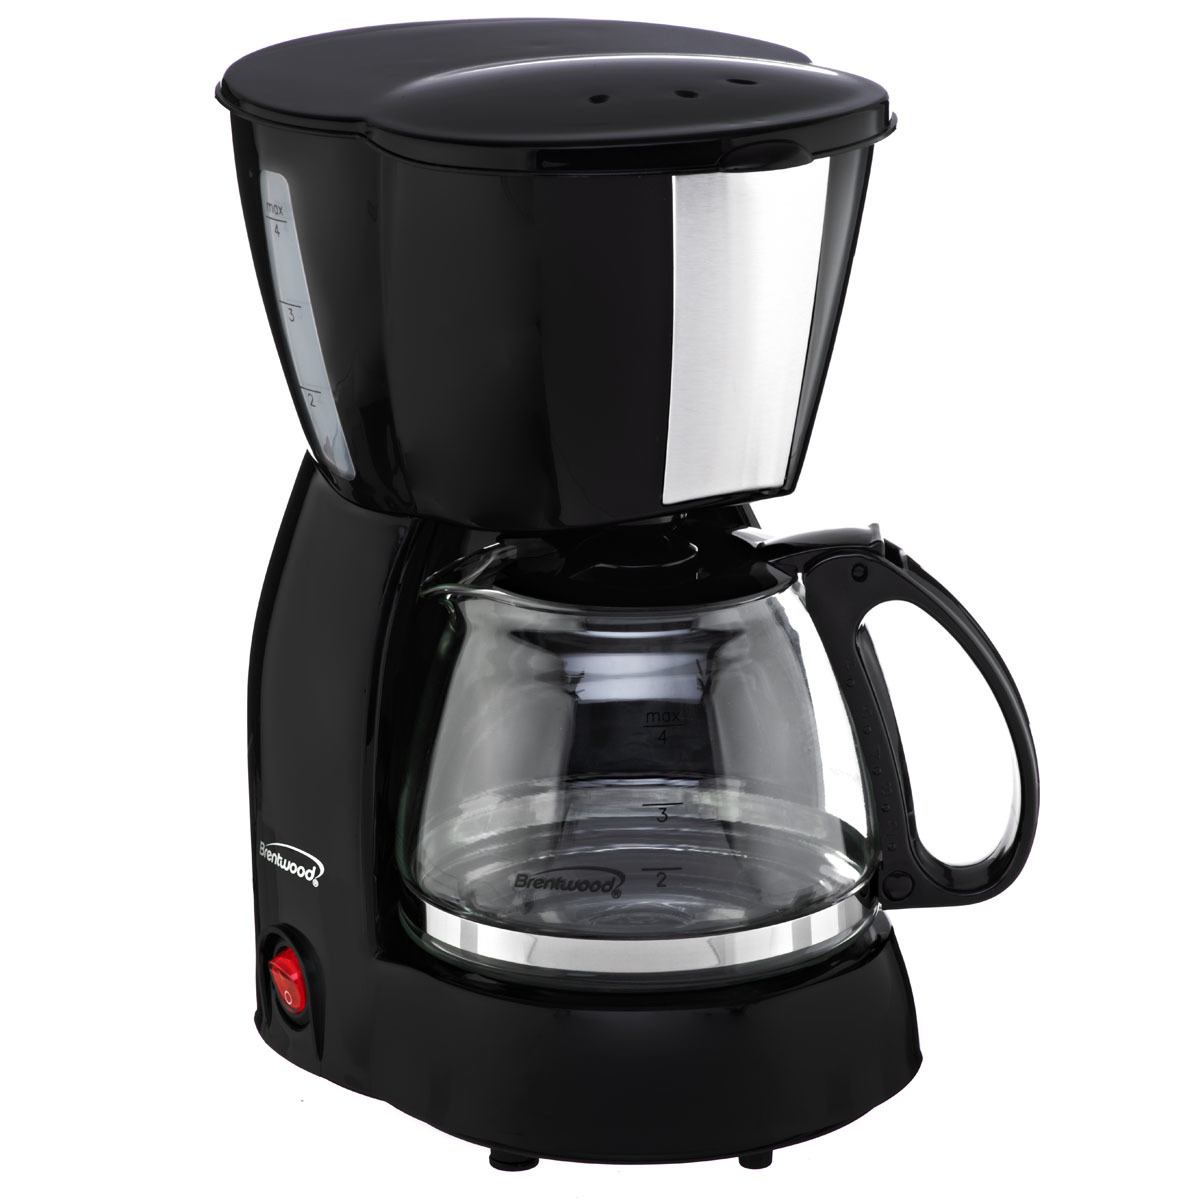 Wholesale Coffee Makers - Black, 4 Cup